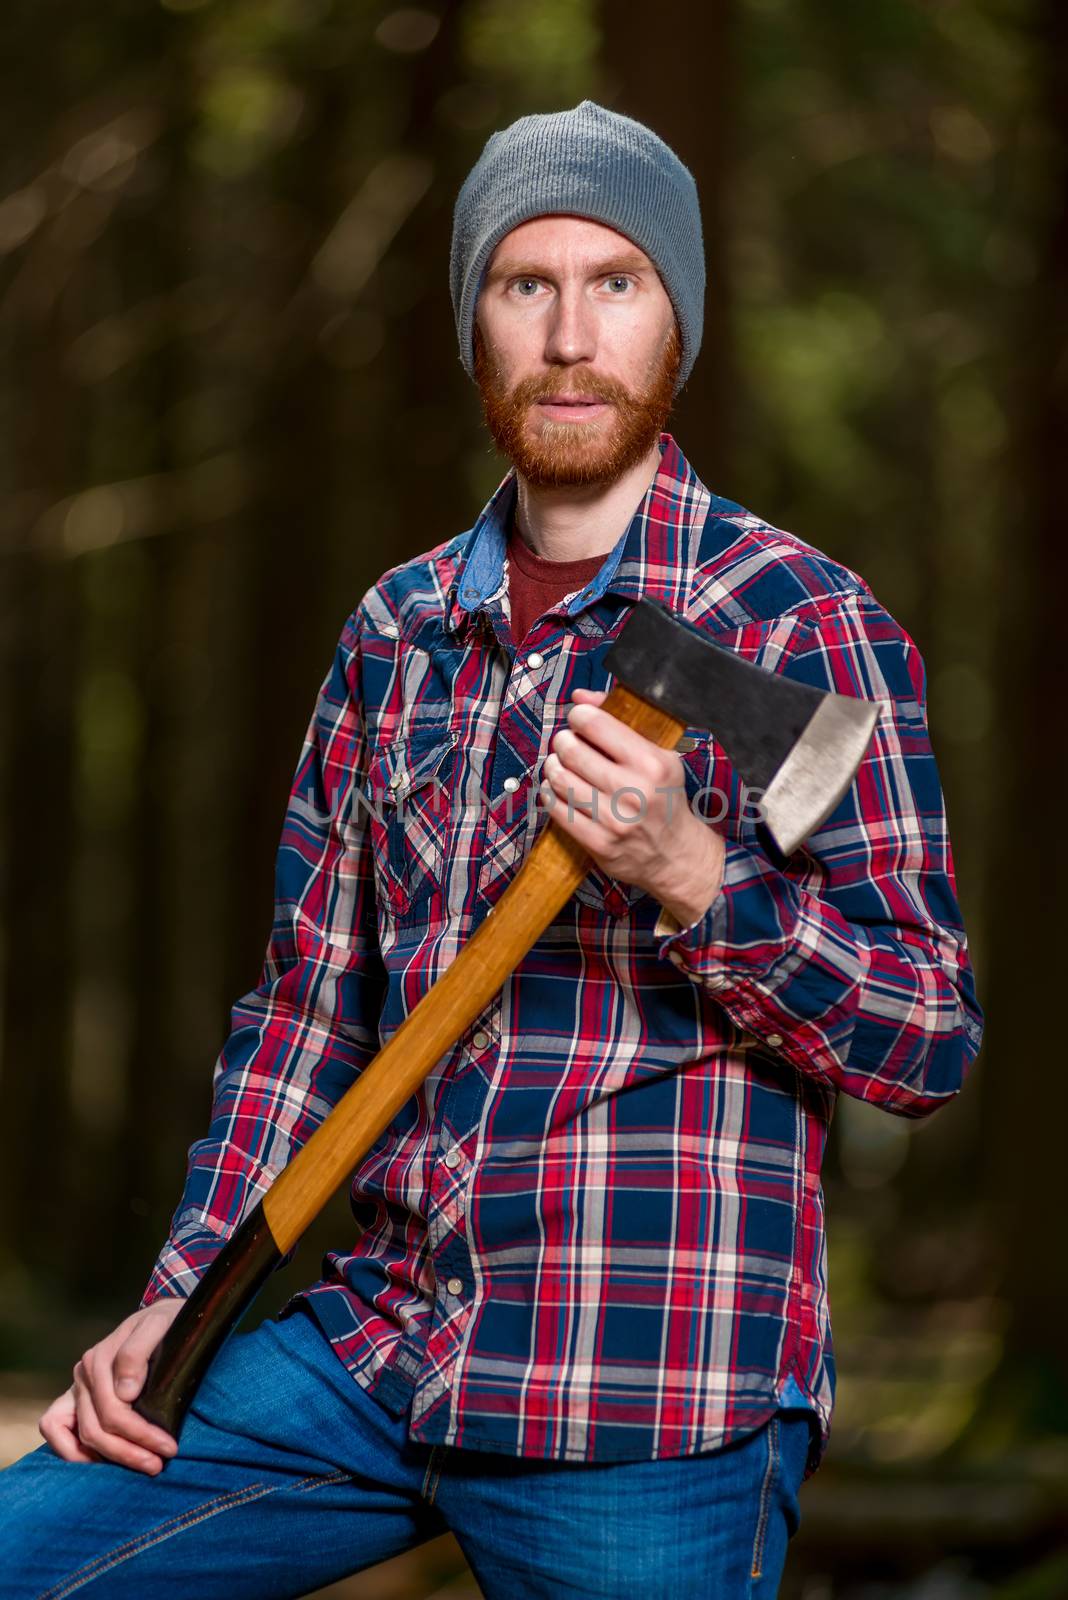 Bearded woodcutter with ax posing in forest